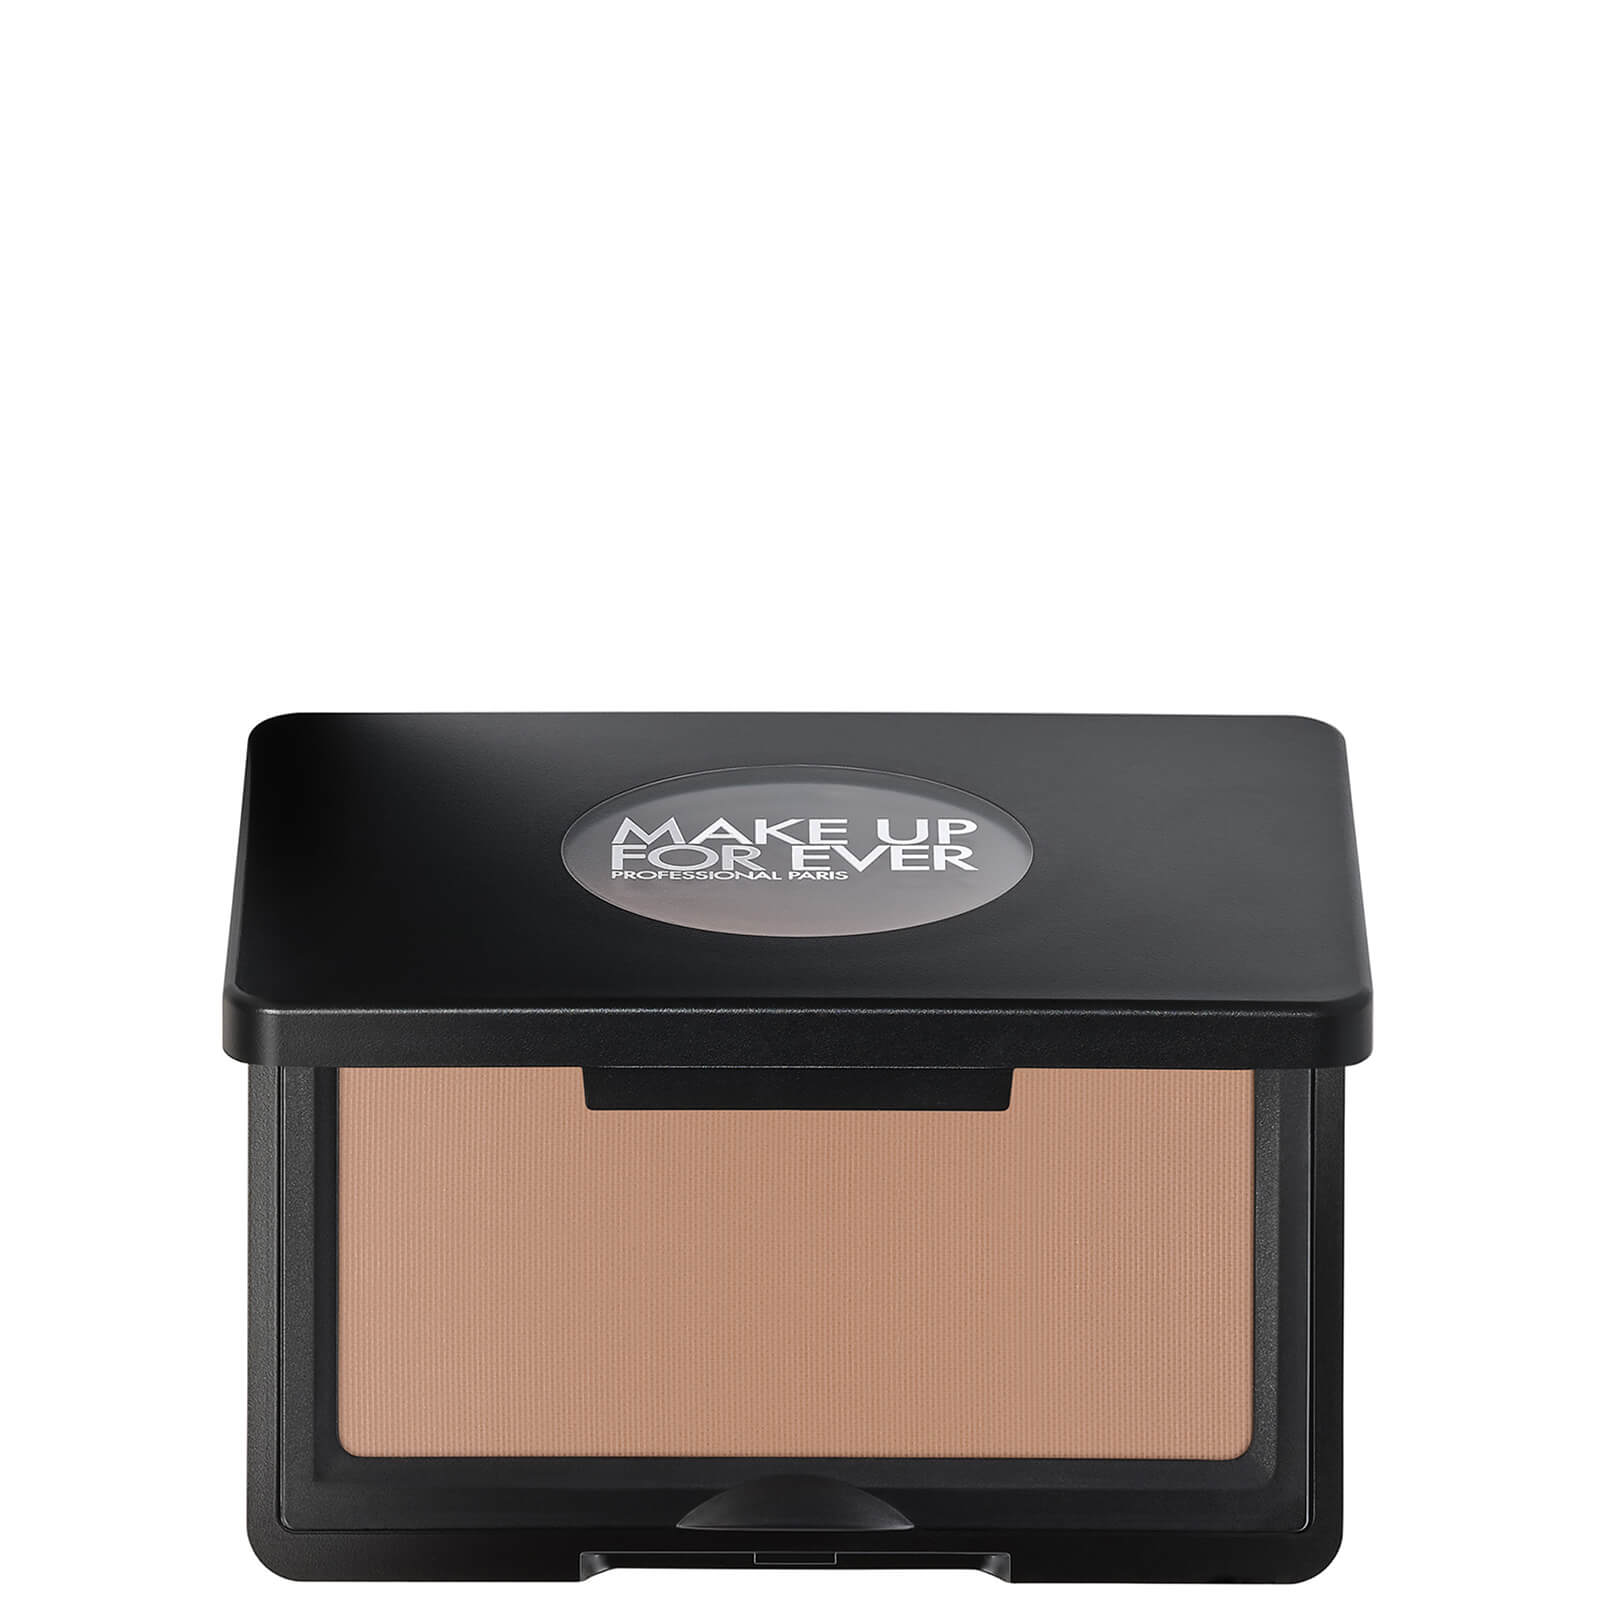 MAKE UP FOR EVER Artist Face Powders Sculpt 4g (Various Shades) - S410 - Thrilled Chestnut